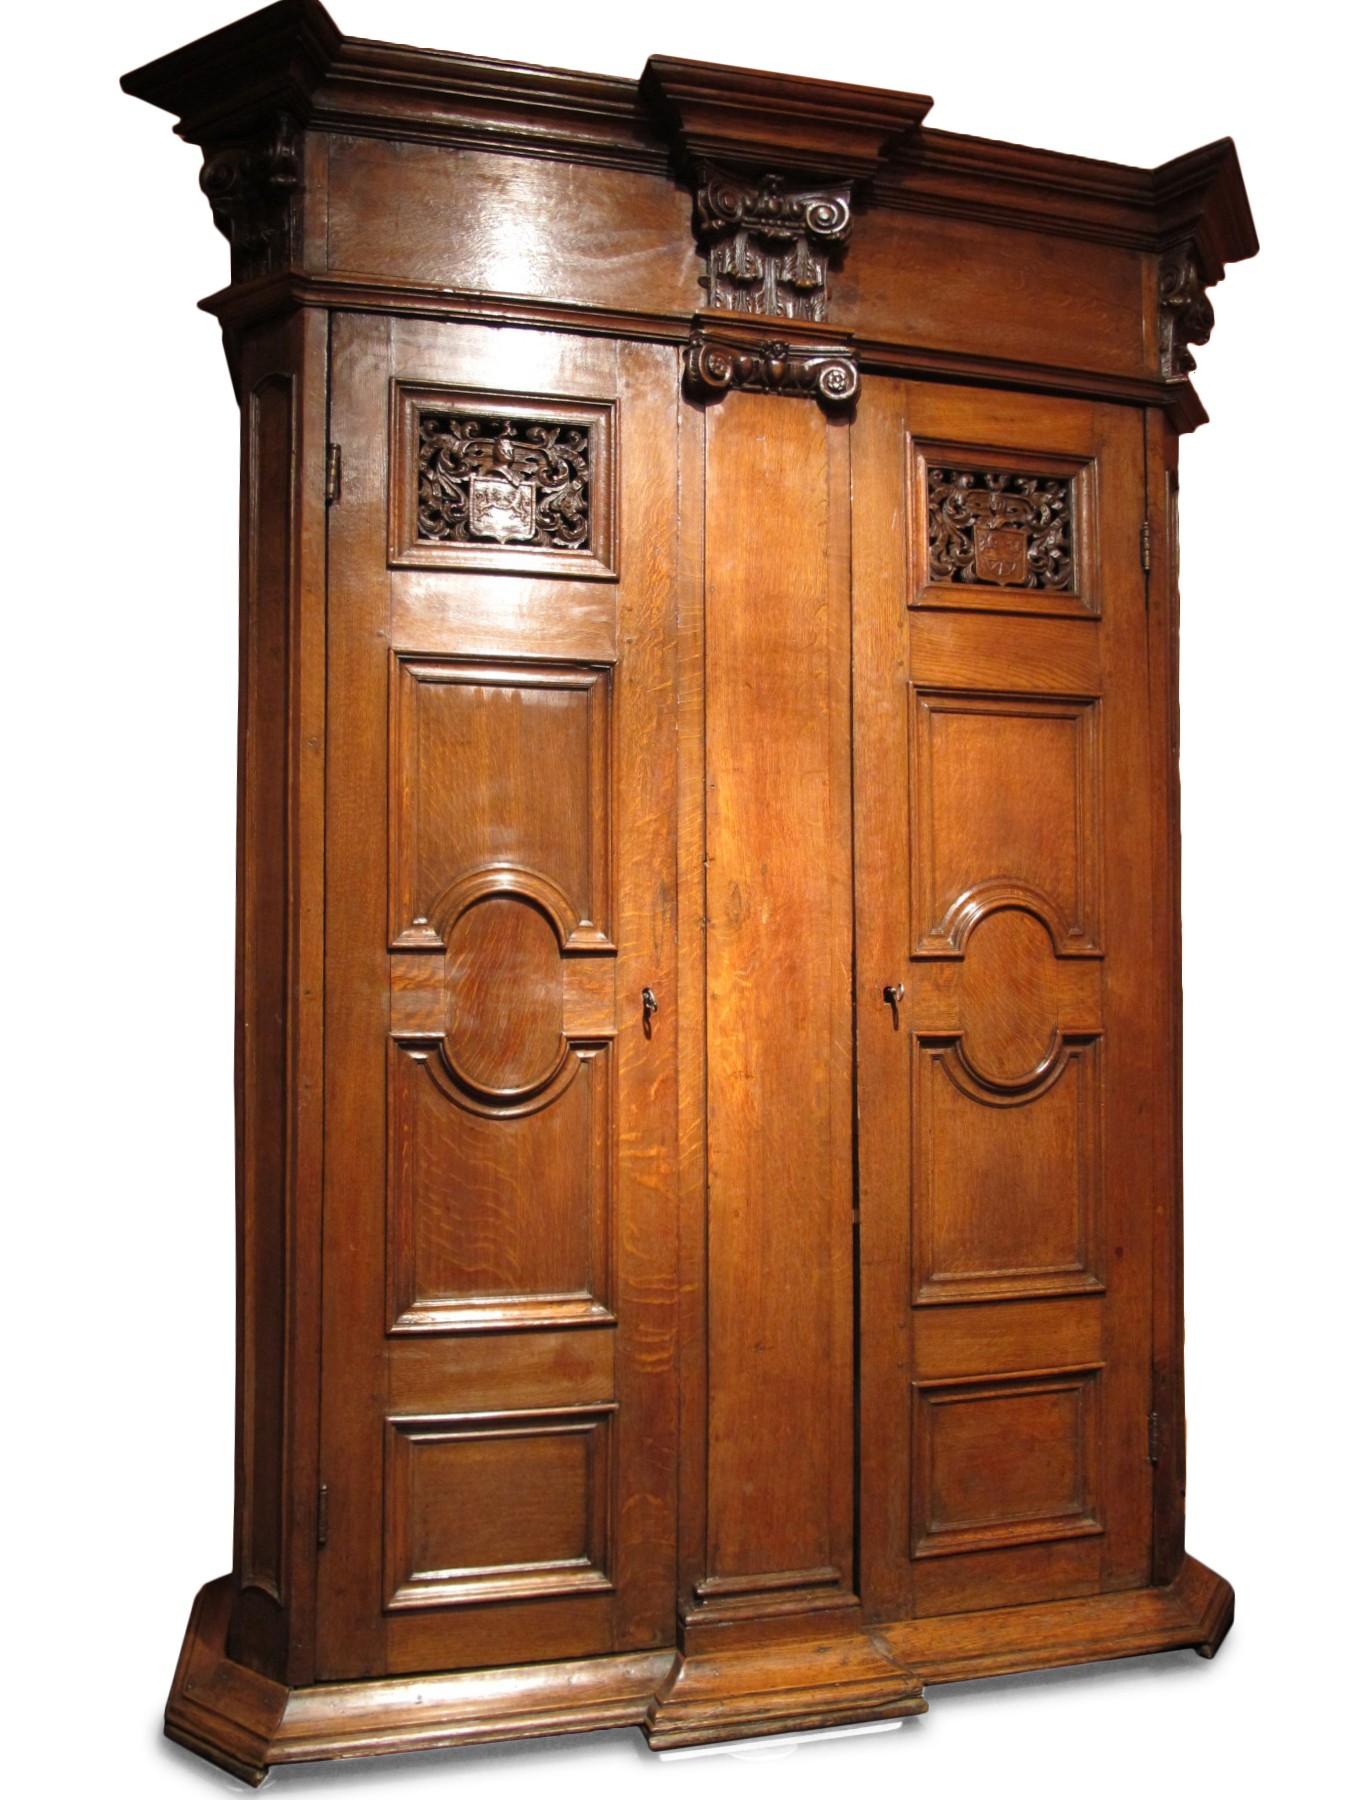 This interesting oak cabinet of germanic workmanship is a wedding furniture.

The cabinet rests on a molded base, opens with two doors located on each side of a large pilaster.
The frame, surmounted by an ionic capital is decorated with a flower